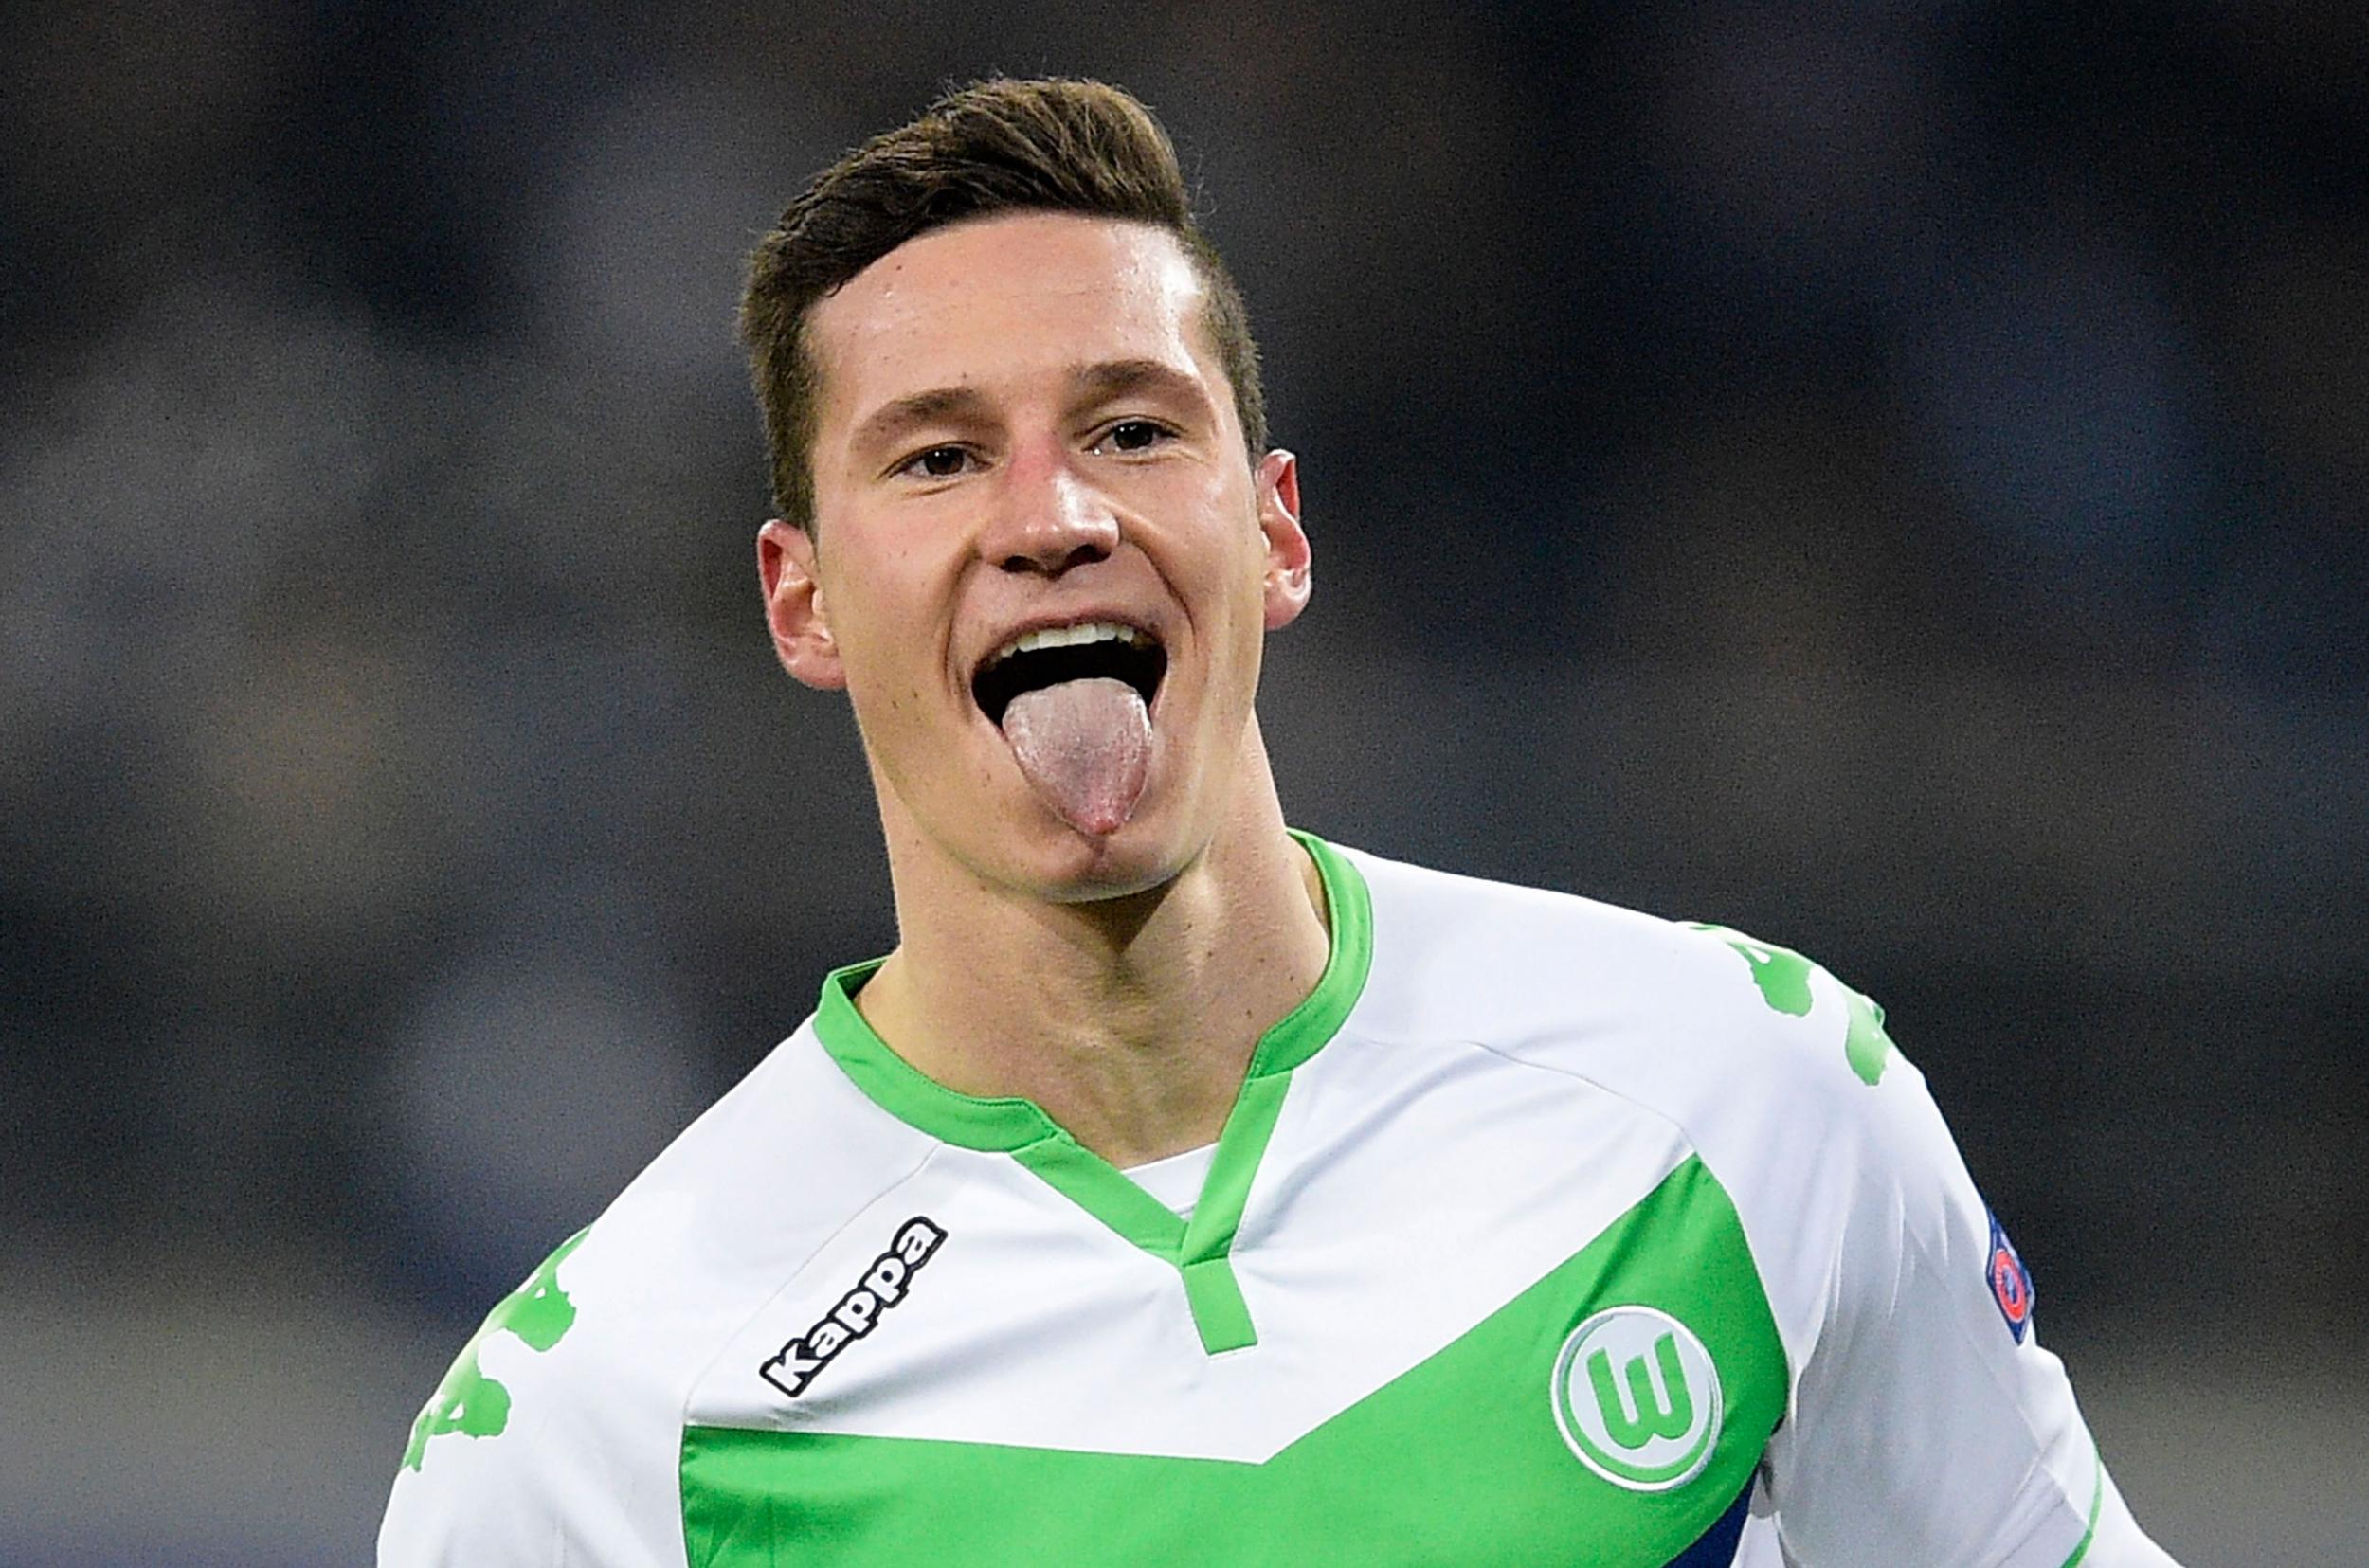 Draxler will join the Ligue 1 champions on a four-and-a-half year contract